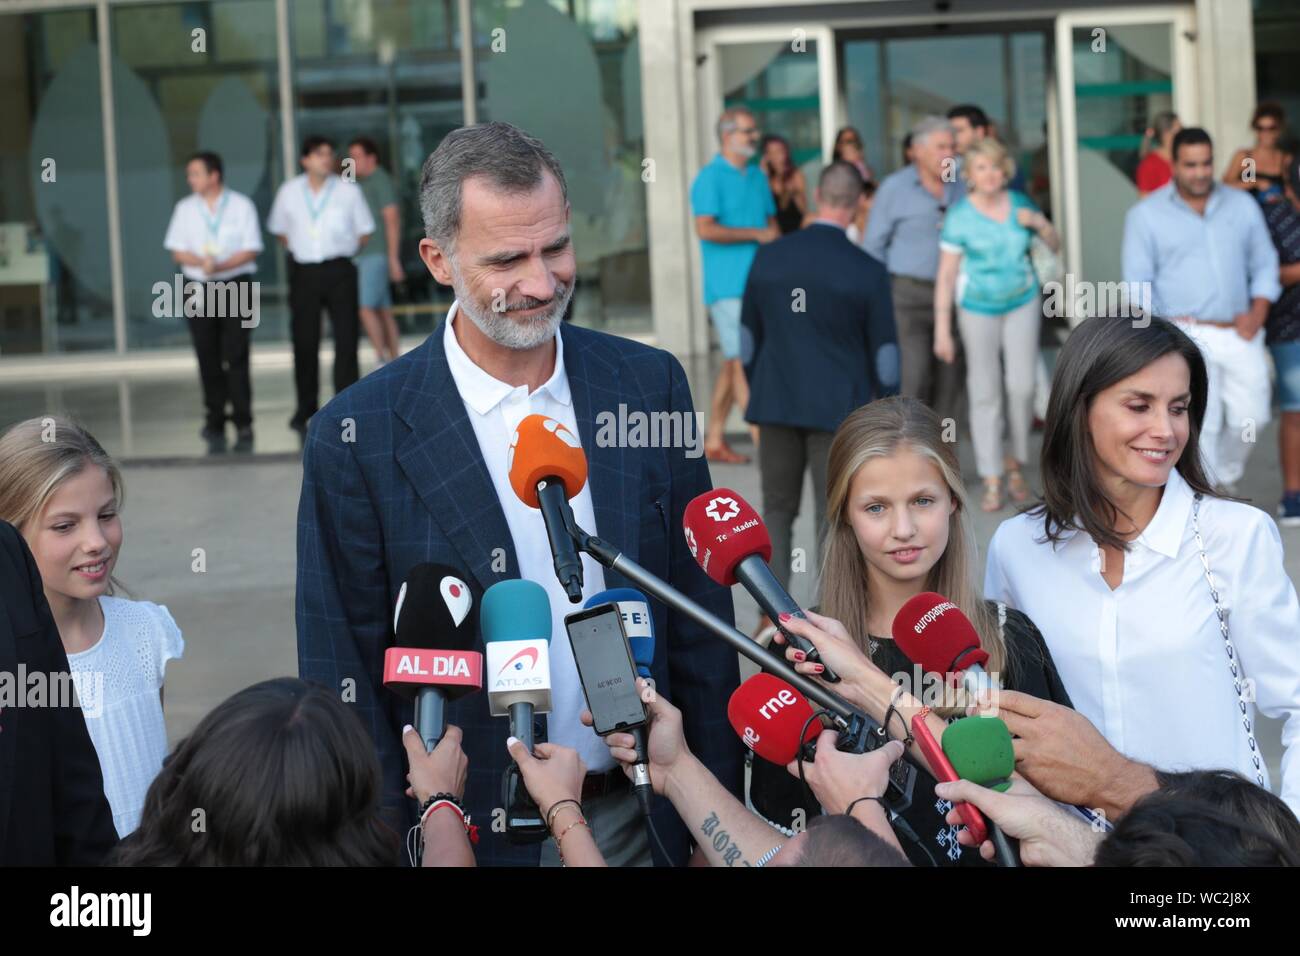 Madrid, Spain. 27th Aug, 2019. Felipe VI and Letizia Reyes de España speak with the press accompanied by their daughters Princess Leonor and the Infanta Sofia in the hospital after visiting King Juan Carlos I, who is recovering from an open heart operation. Credit: dpa picture alliance/Alamy Live News Stock Photo